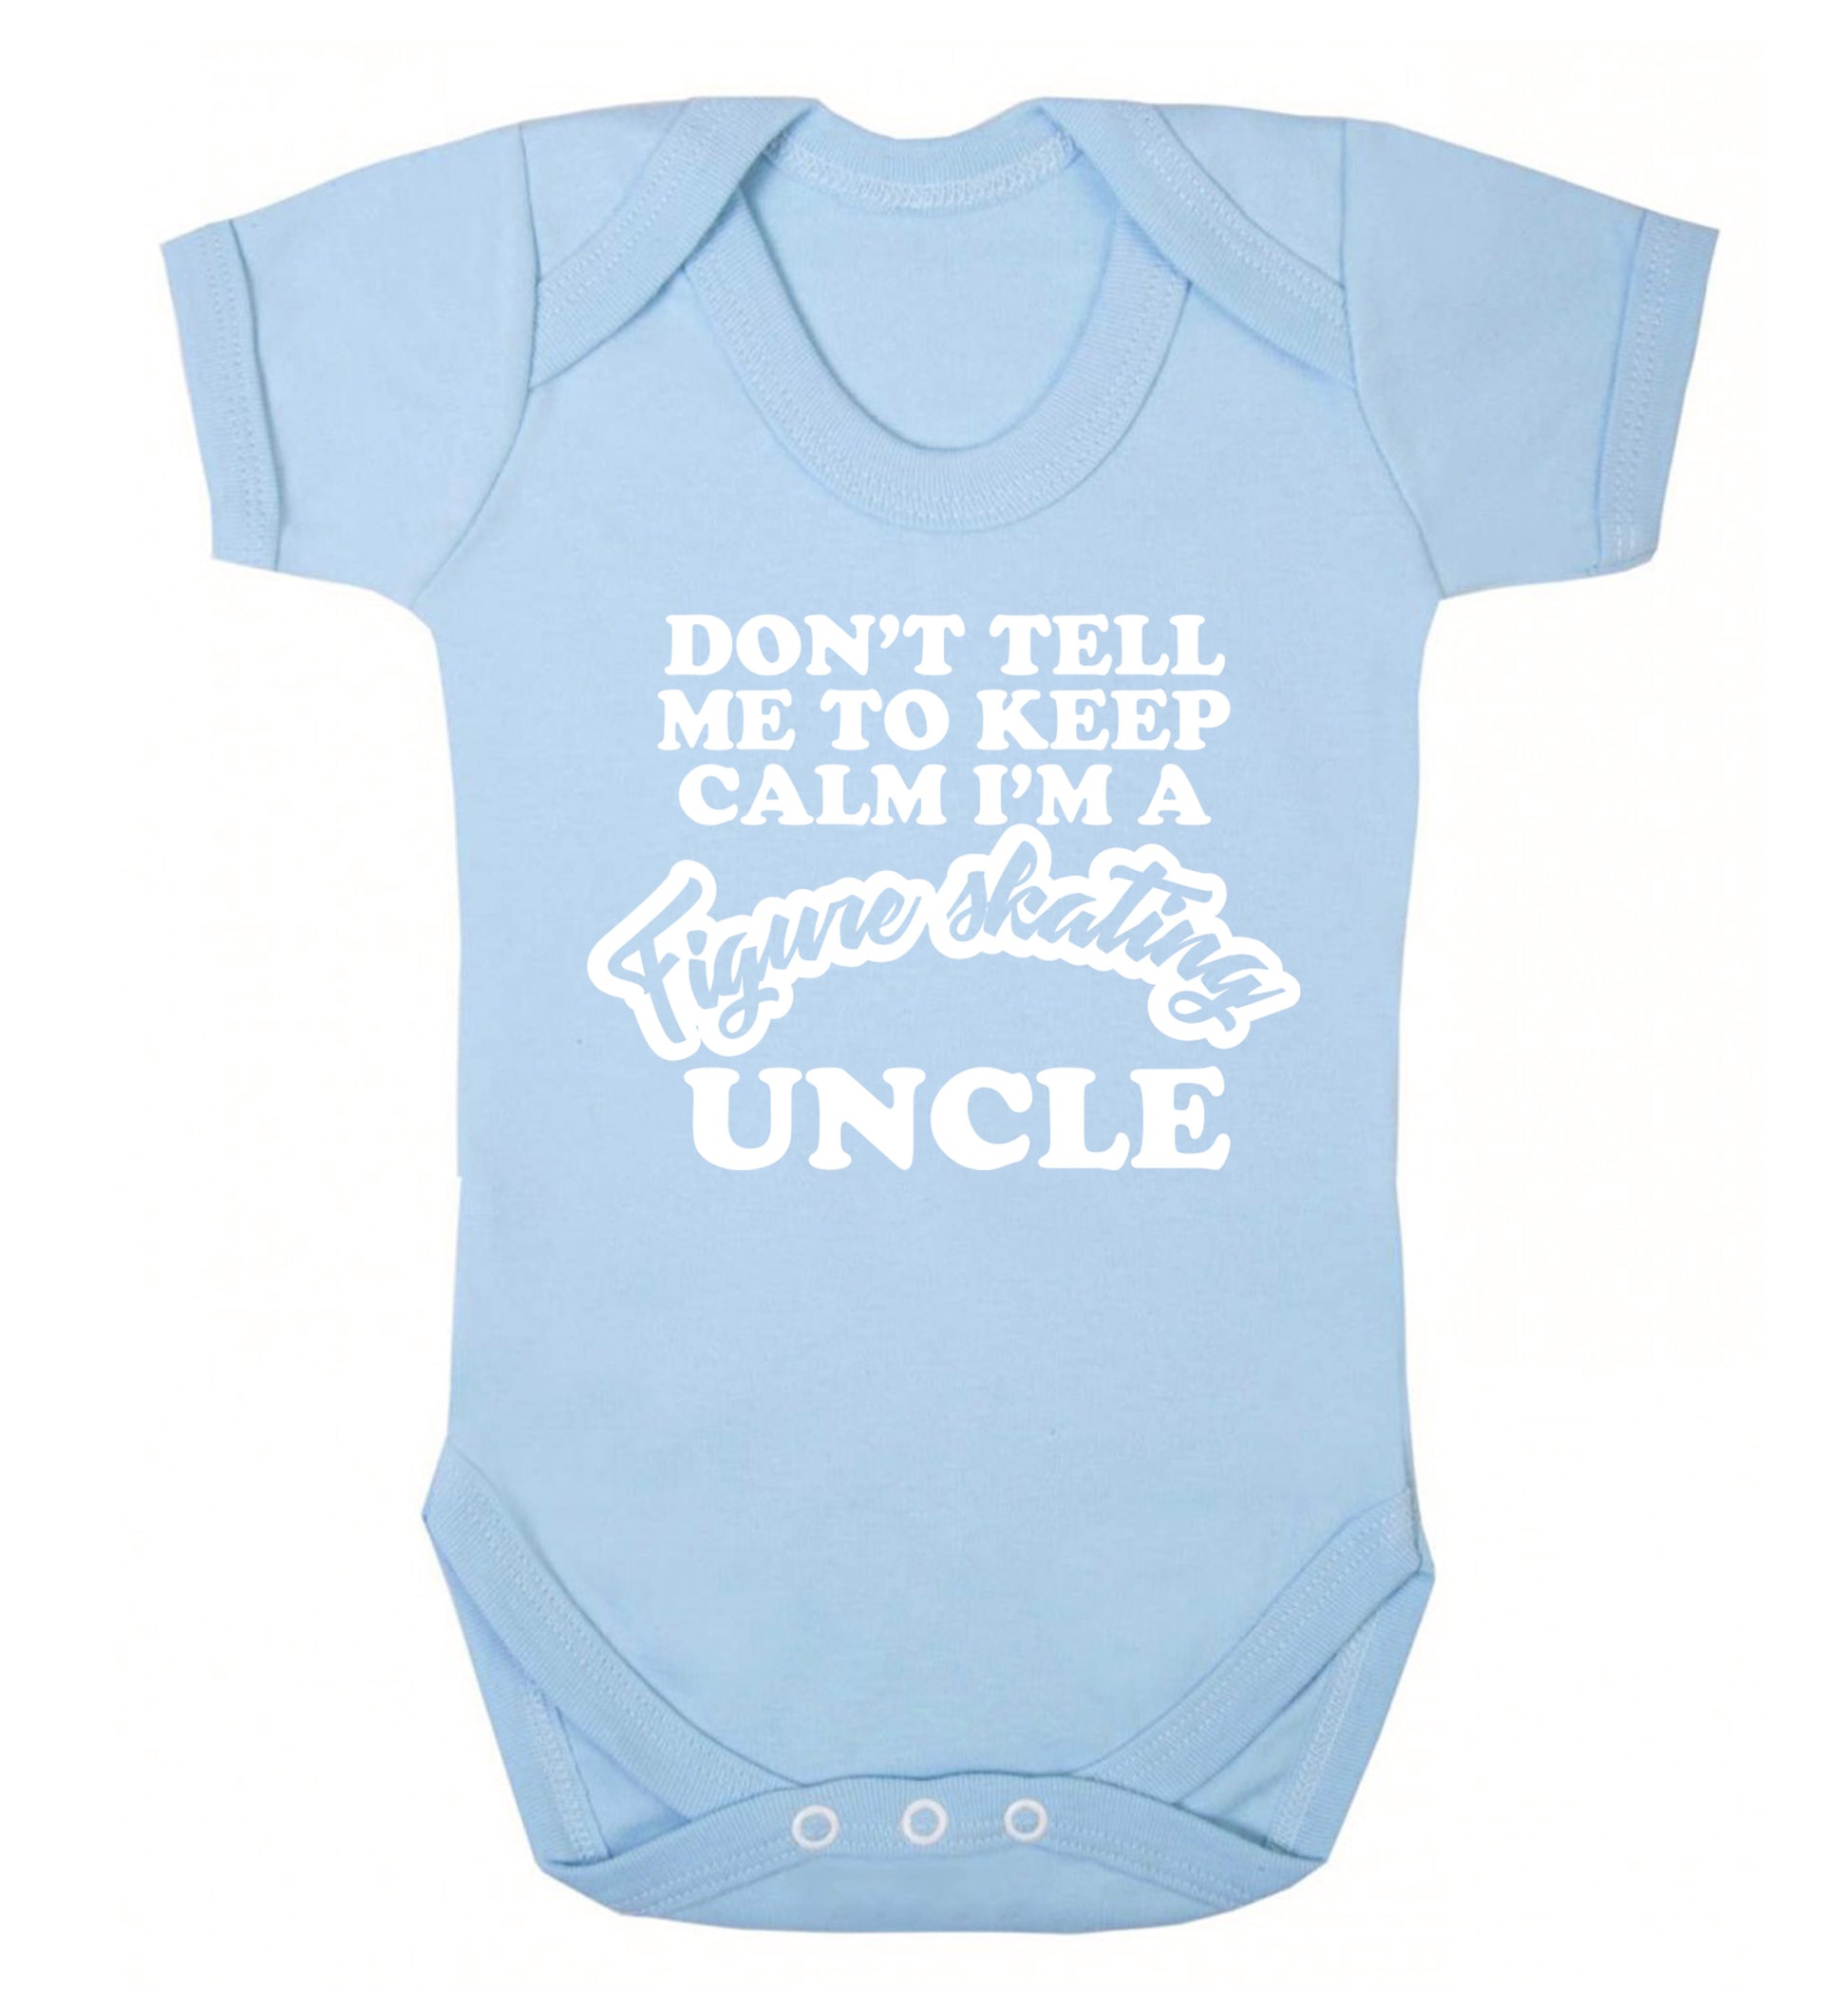 Don't tell me to keep calm I'm a figure skating uncle Baby Vest pale blue 18-24 months